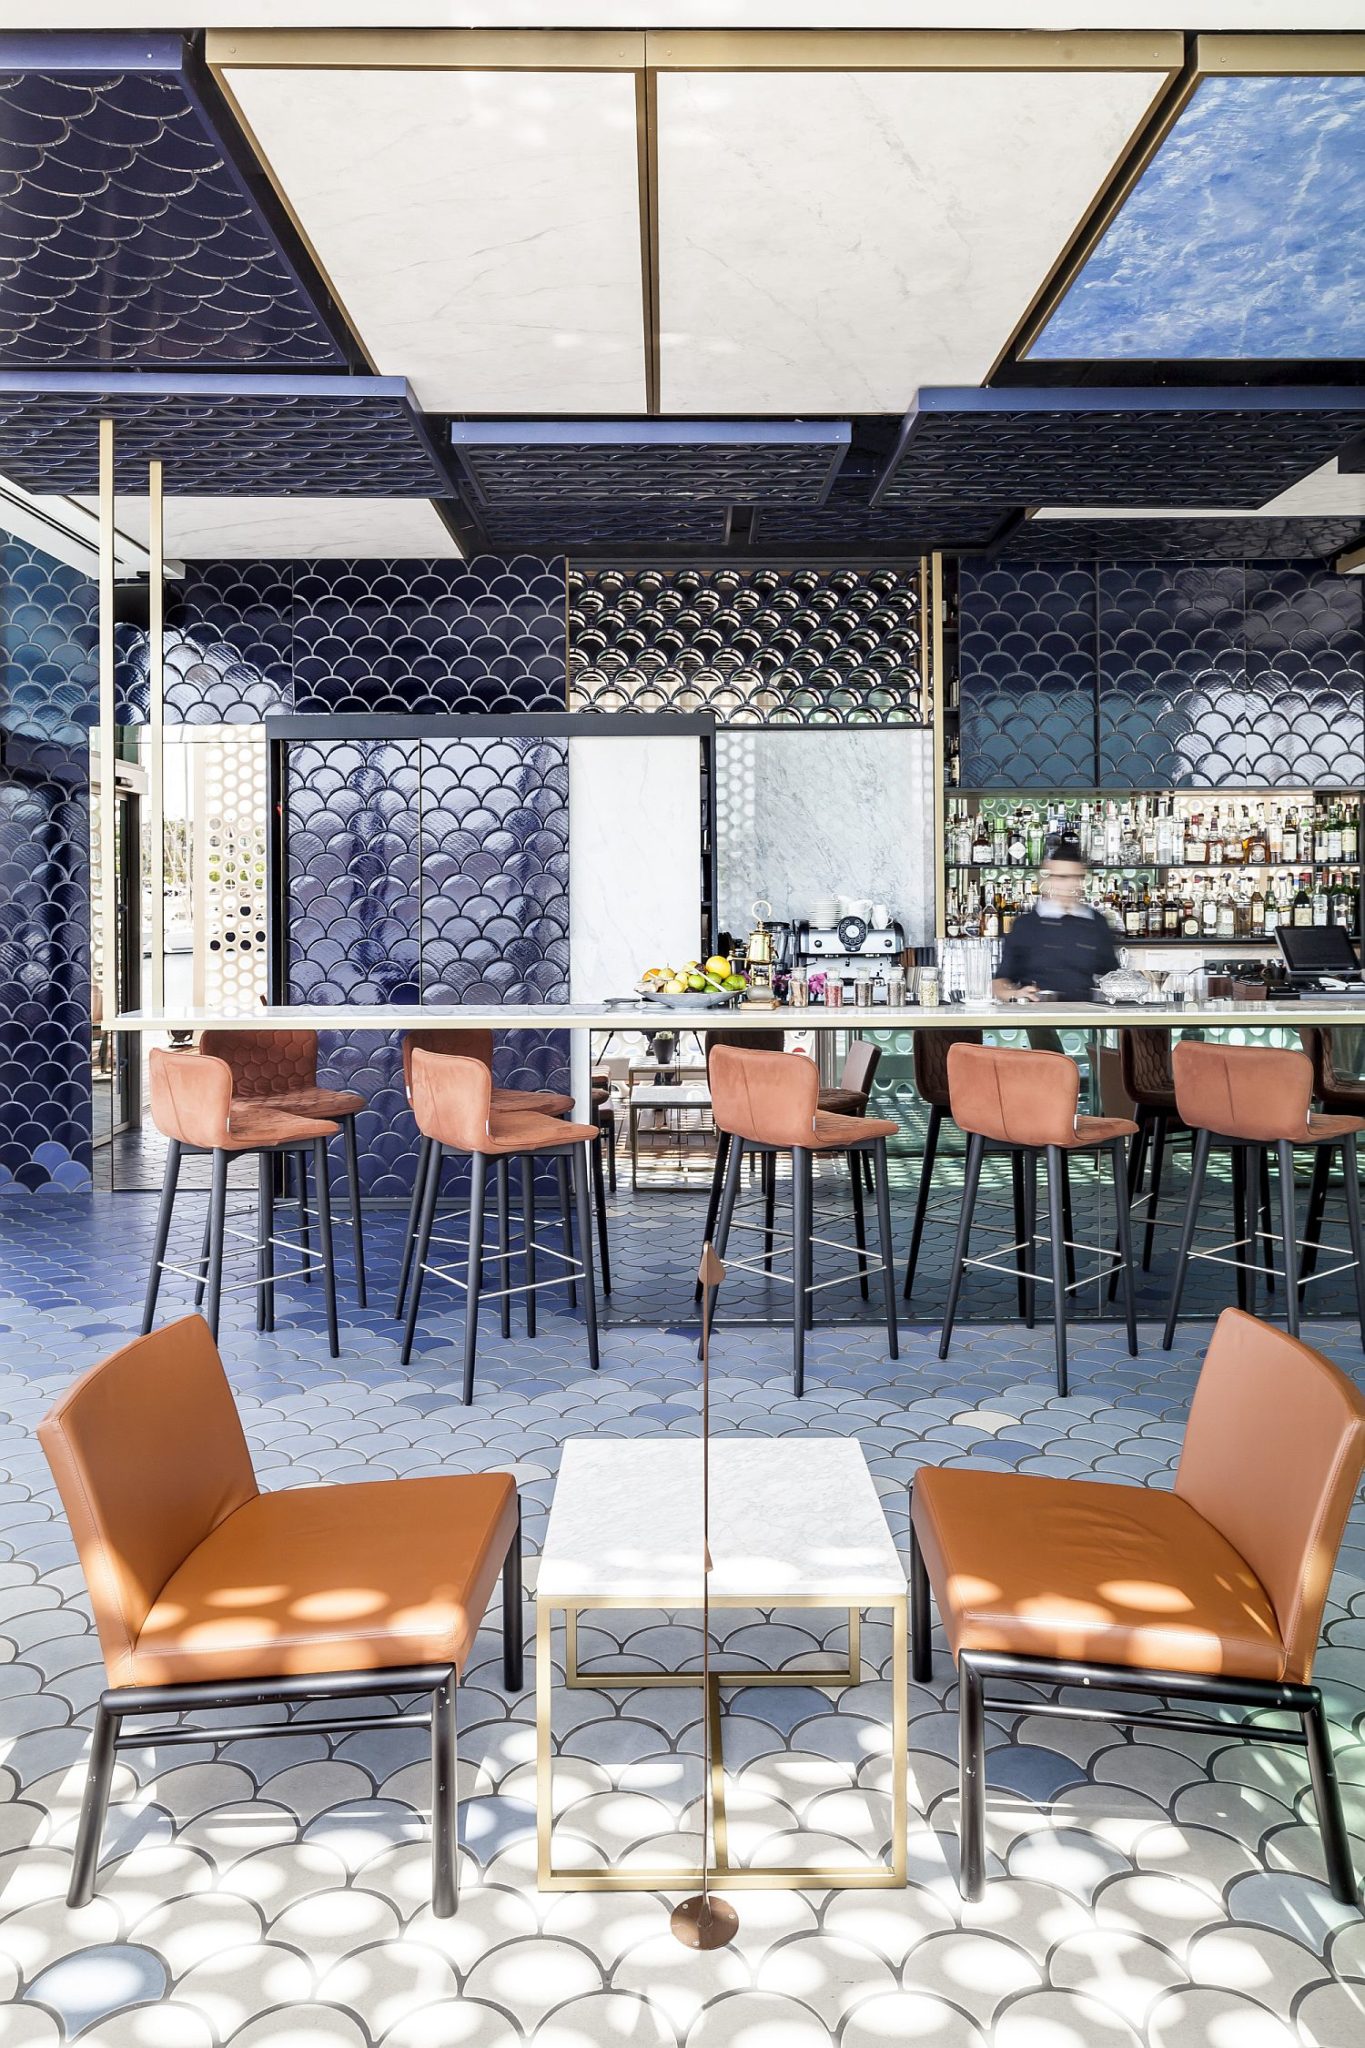 A break wave inspires the design of this cool bar in Barcelona